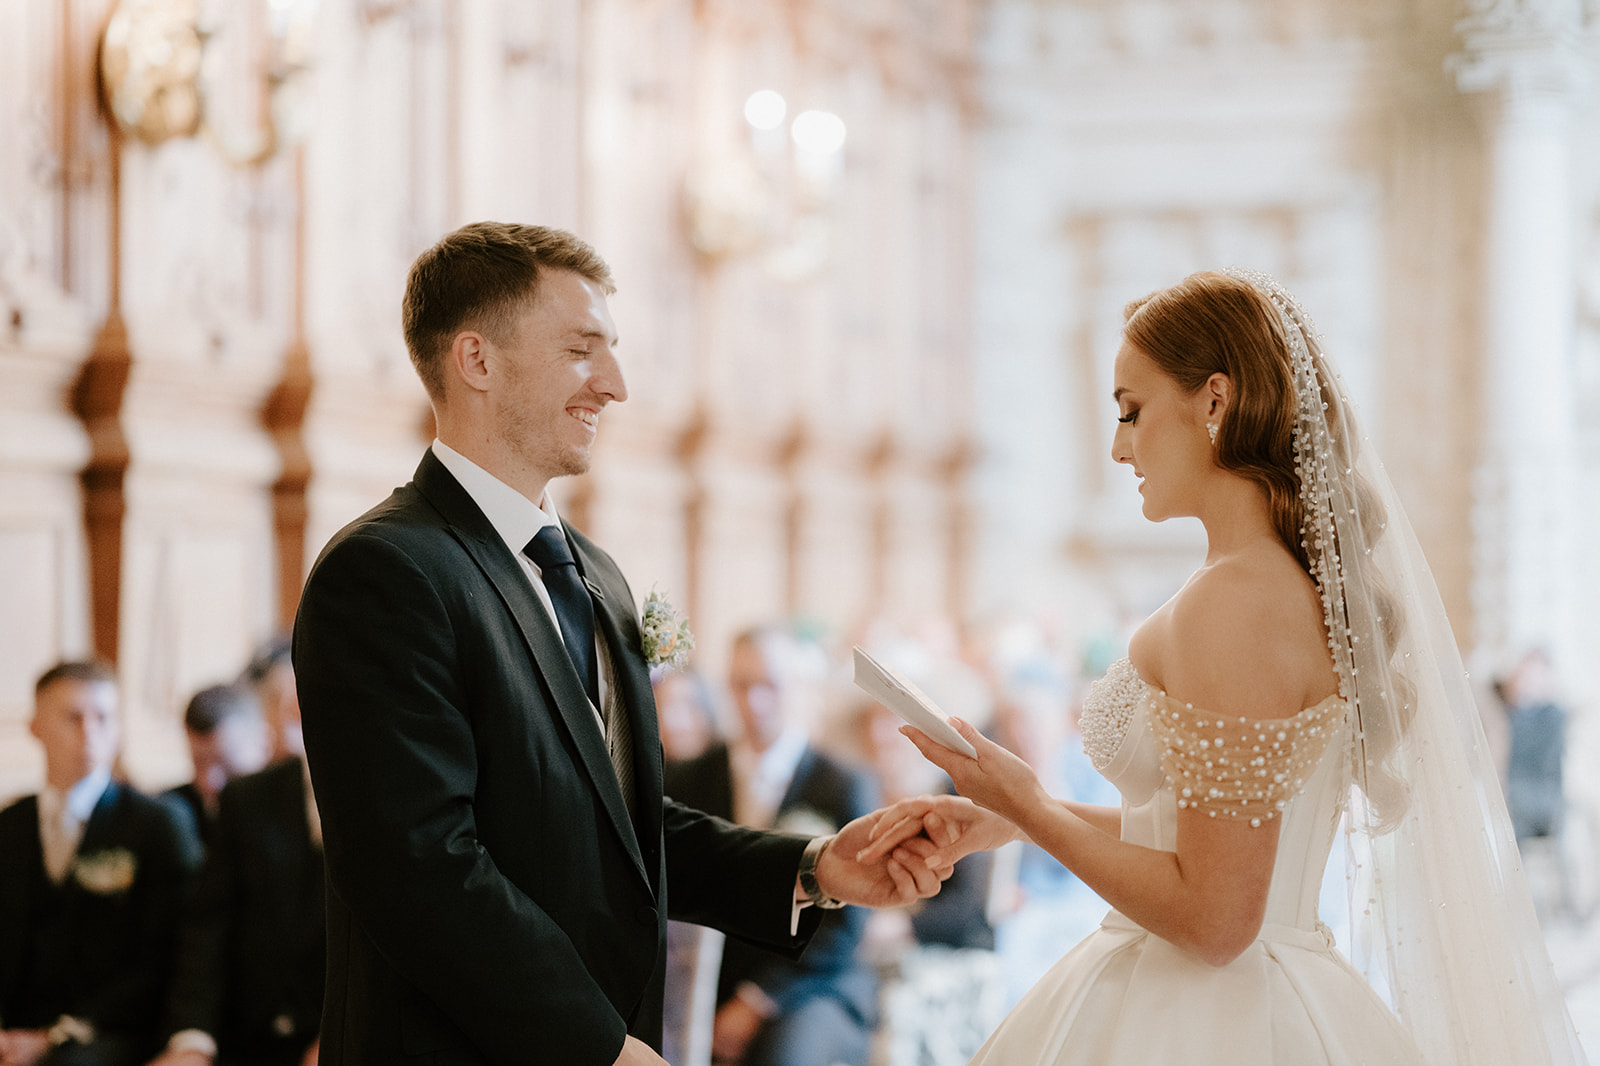 ceremony in the great hall at harlaxton manor